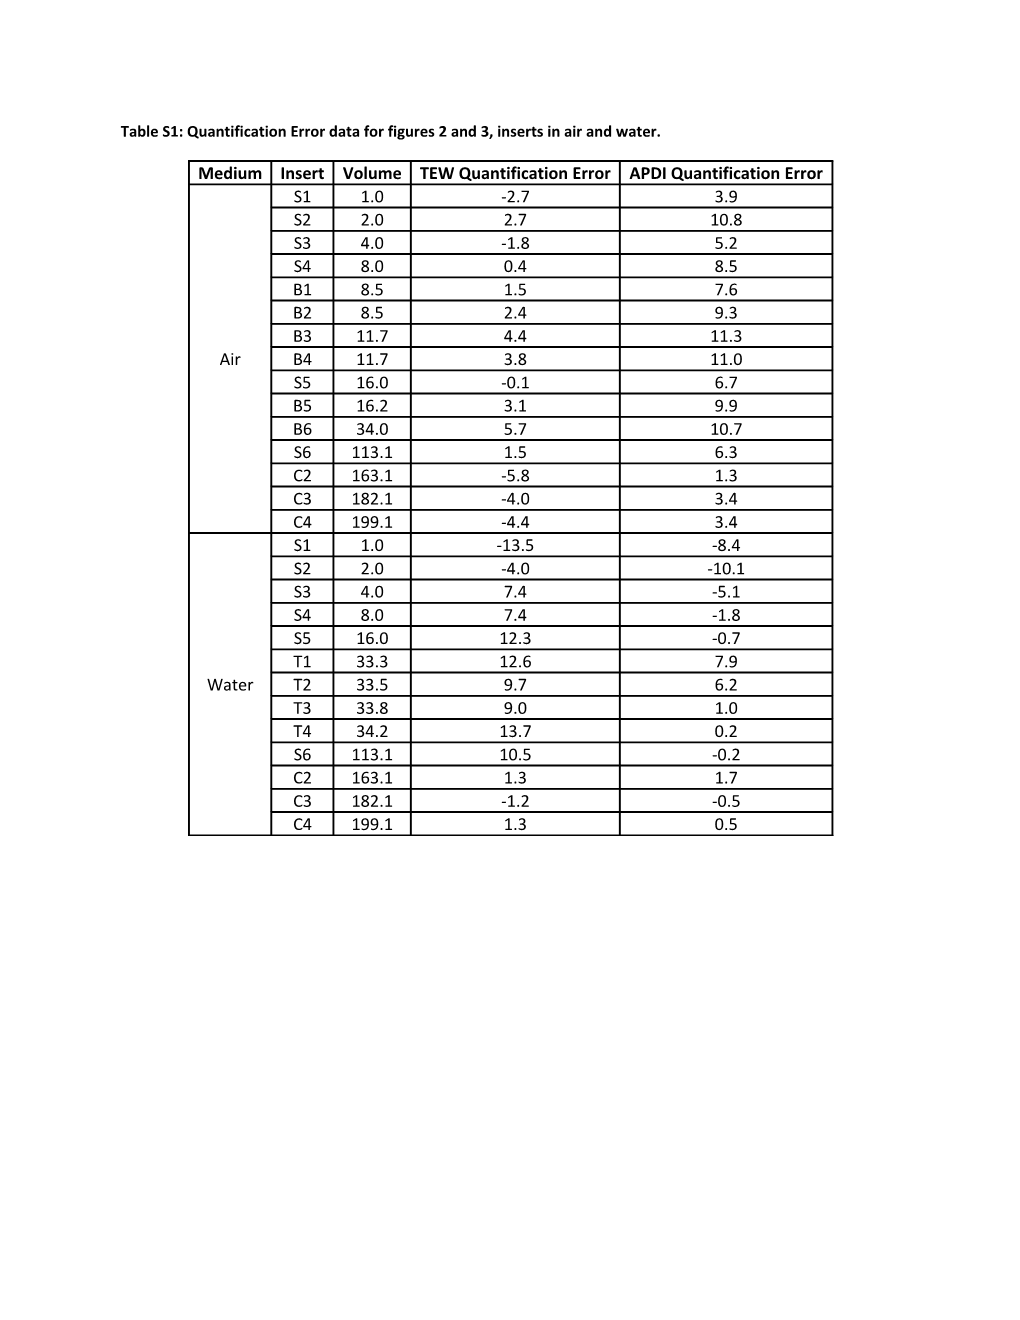 Table S1: Quantification Error Data for Figures 2 and 3, Inserts in Air and Water